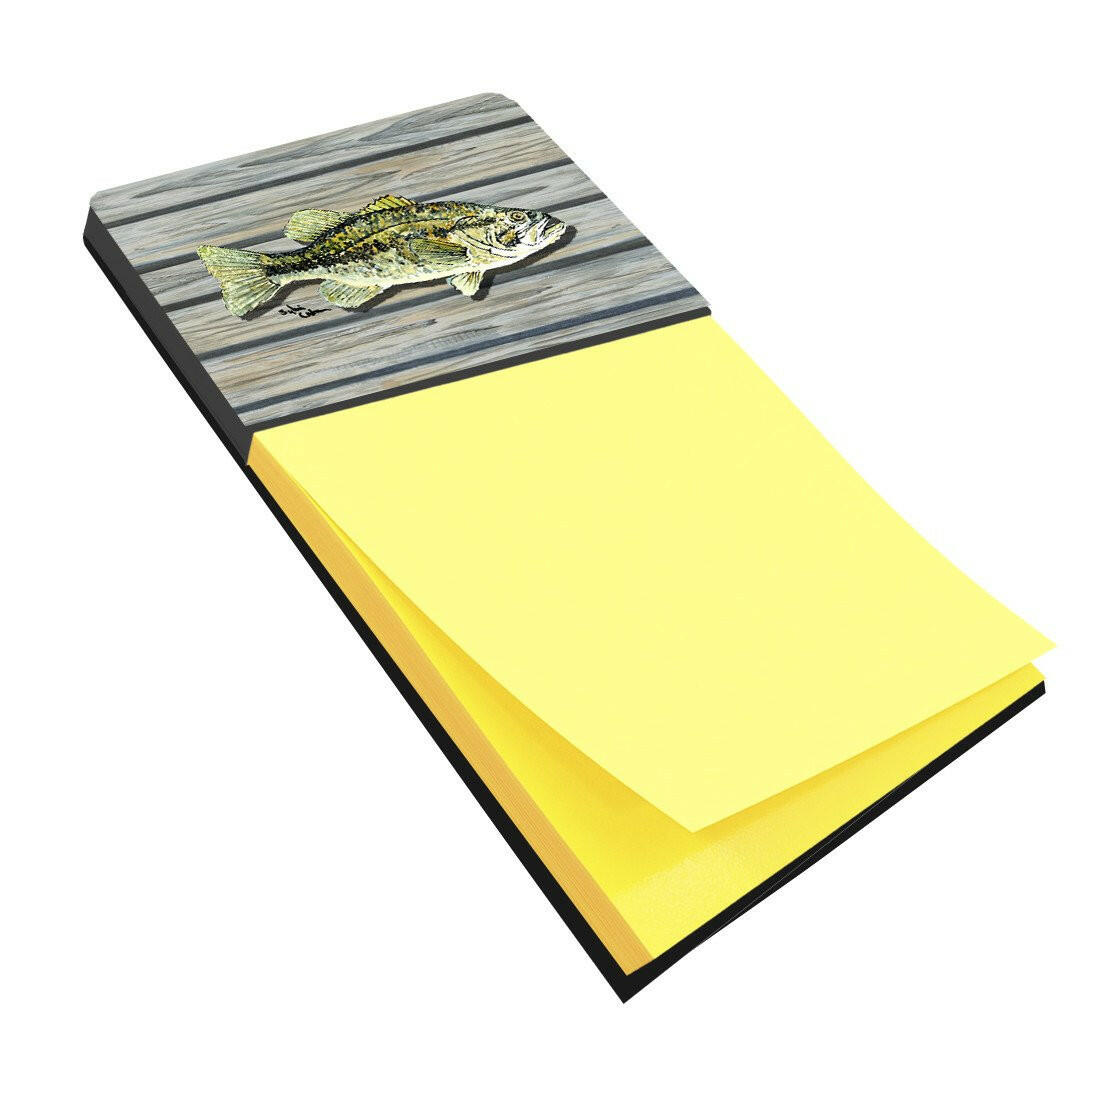 Fish Bass Small Mouth Refiillable Sticky Note Holder or Postit Note Dispenser 8493SN by Caroline's Treasures